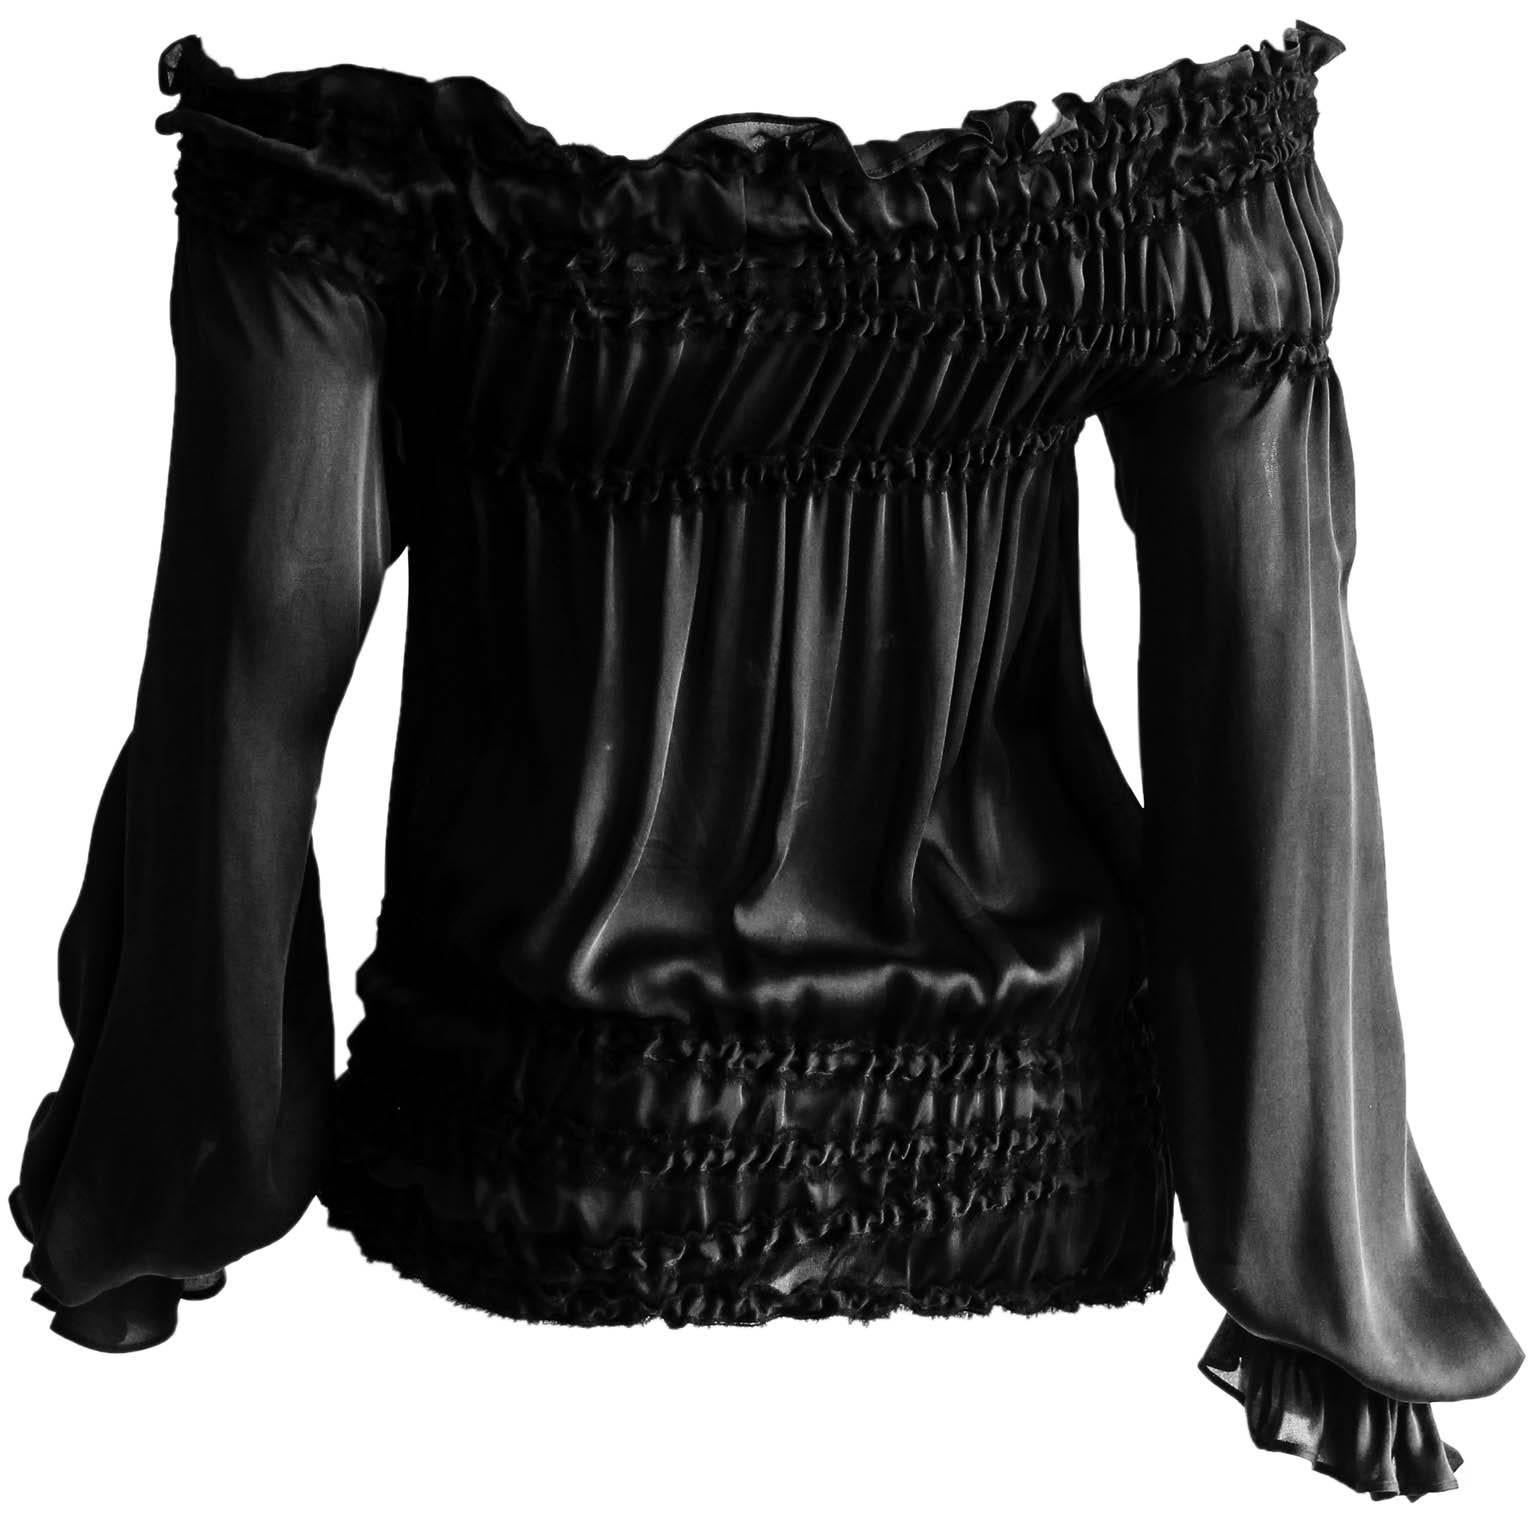 Tom Ford's Amazing Iconic YSL Rive Gauche Fall Winter 2001 Black Ruched Silk Gypsy Boho Runway Blouse!

Who could ever forget Tom Ford's fall/winter 2001 show for Yves Saint Laurent Rive Gauche & those heavenly black "gypsy" blouses?